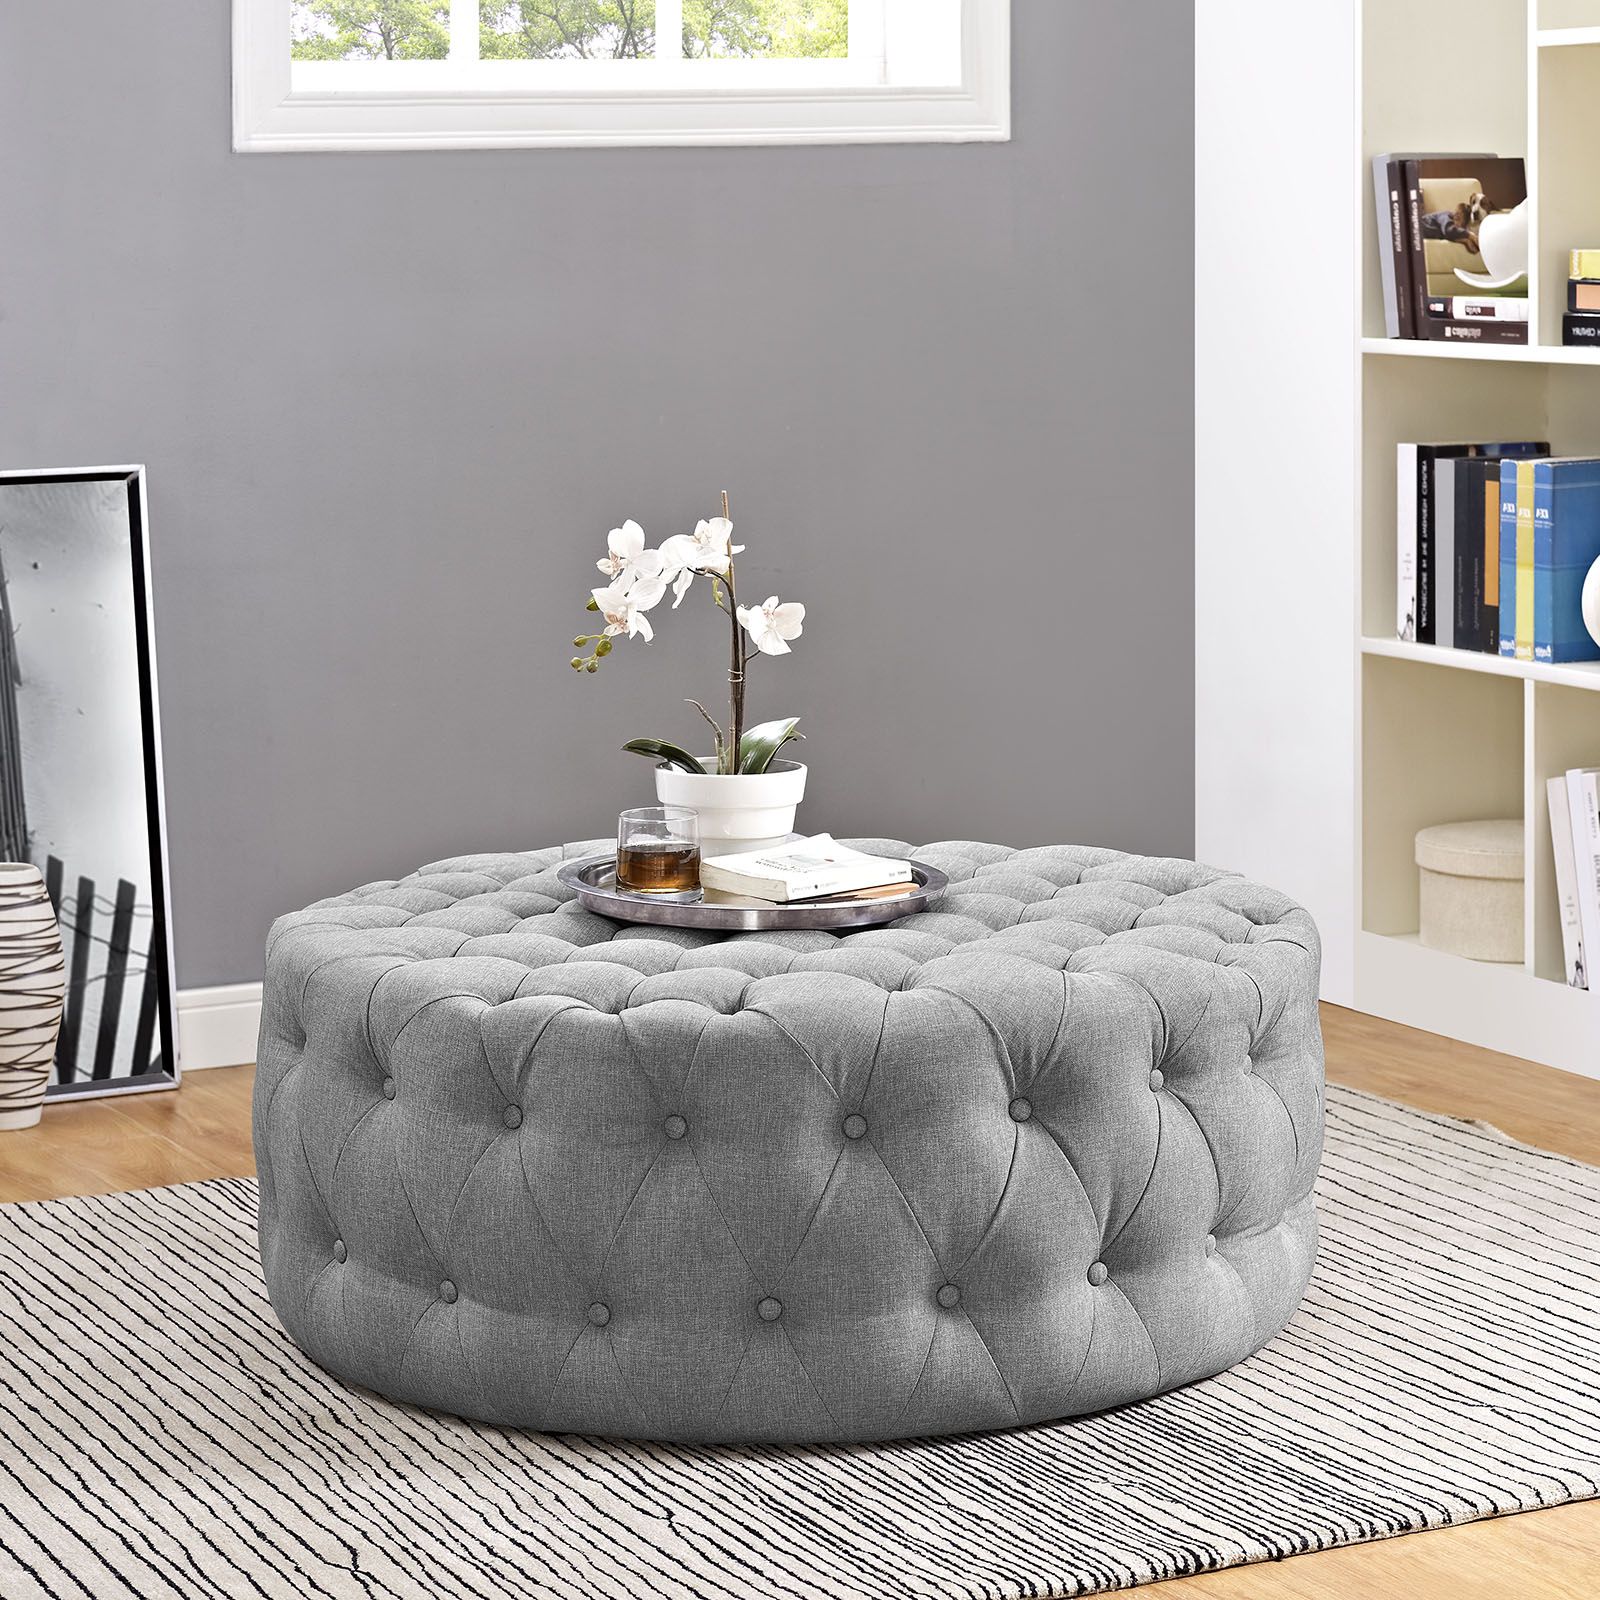 Amour Upholstered Fabric Ottoman Light Gray Pertaining To Widely Used Beige And Light Gray Fabric Pouf Ottomans (View 9 of 10)